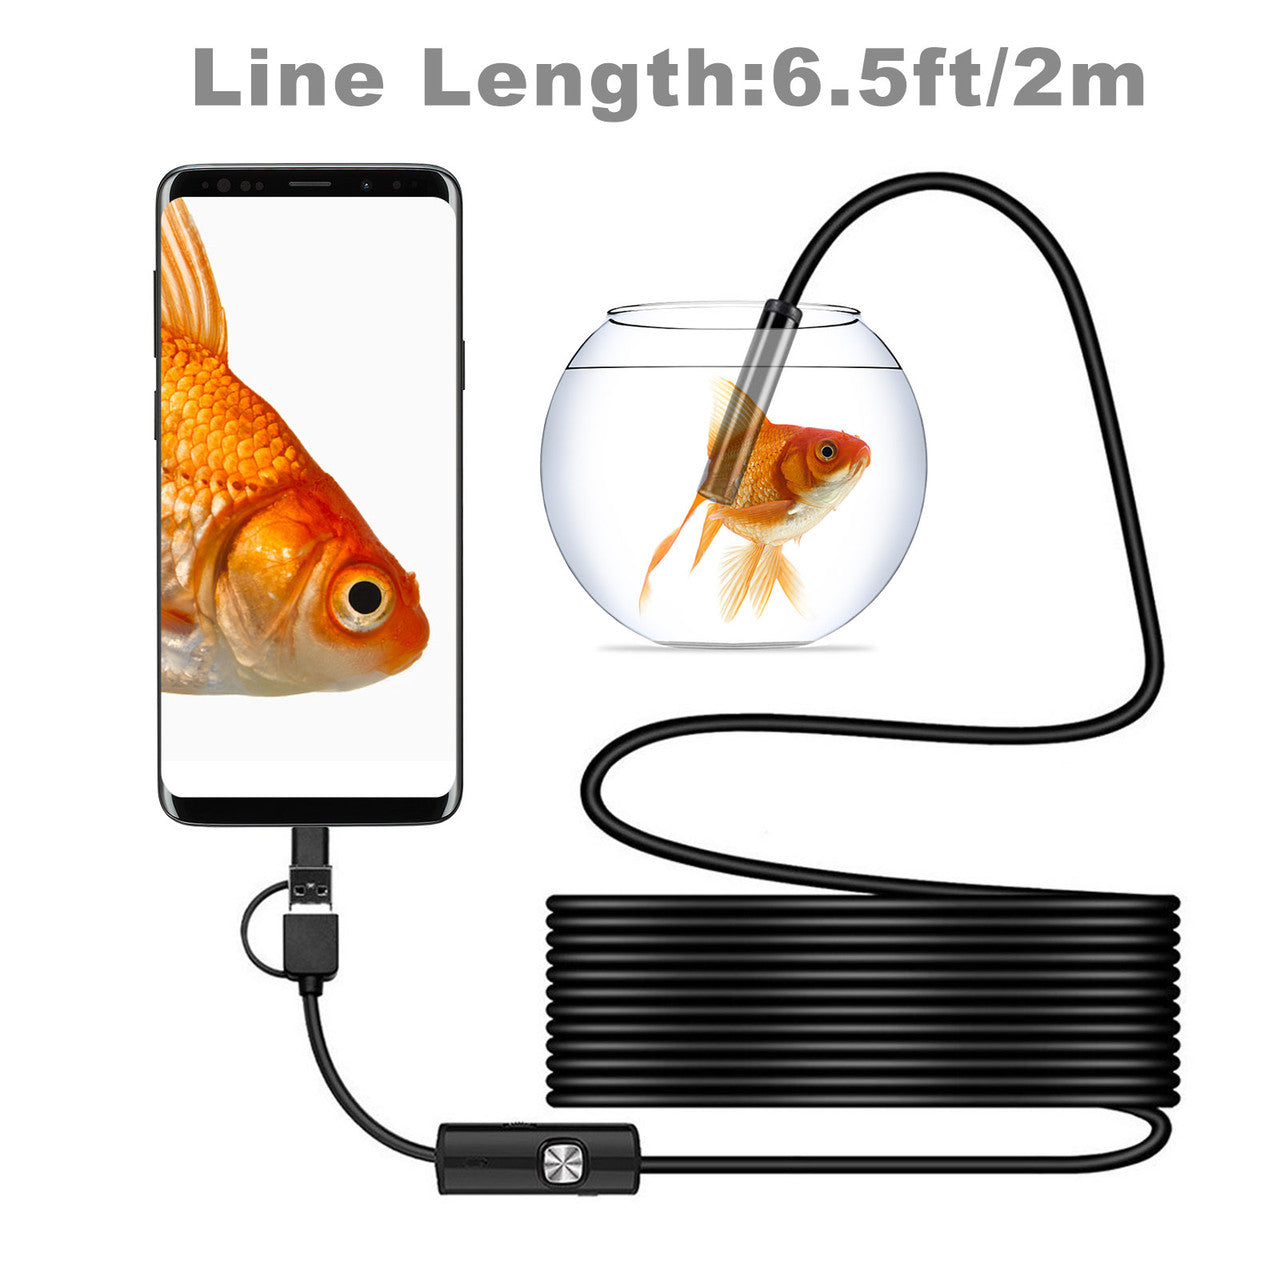 HD Inspection Camera 0.3 MP, Waterproof 6 LED with 7.0mm Lens, w/ Micro USB Type C USB Adpater fits for Android Phone, PC